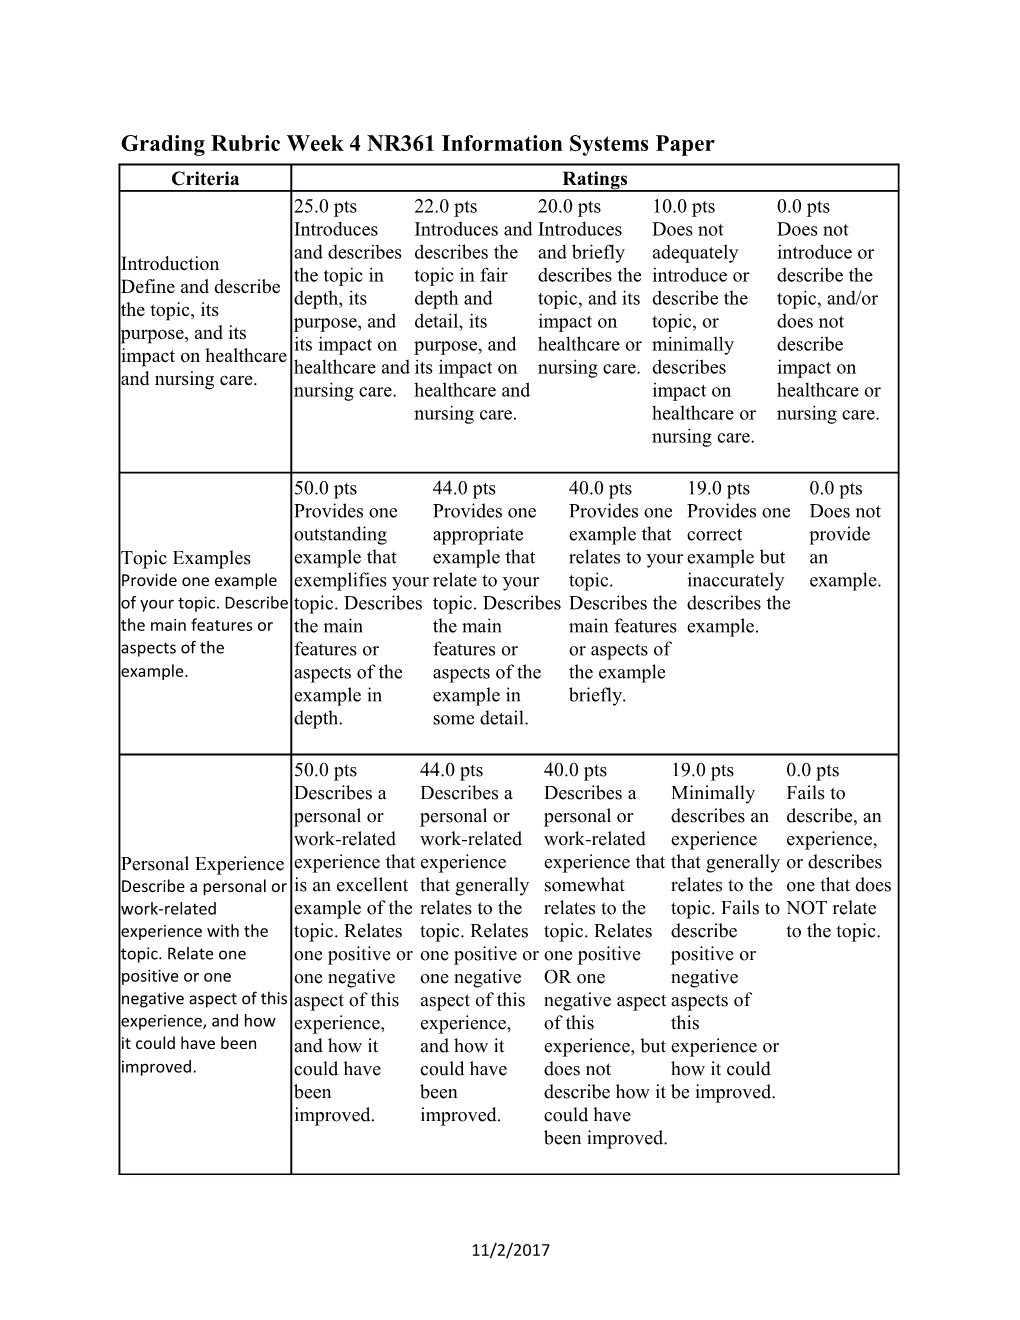 Grading Rubric Week 4 NR361 Information Systems Paper